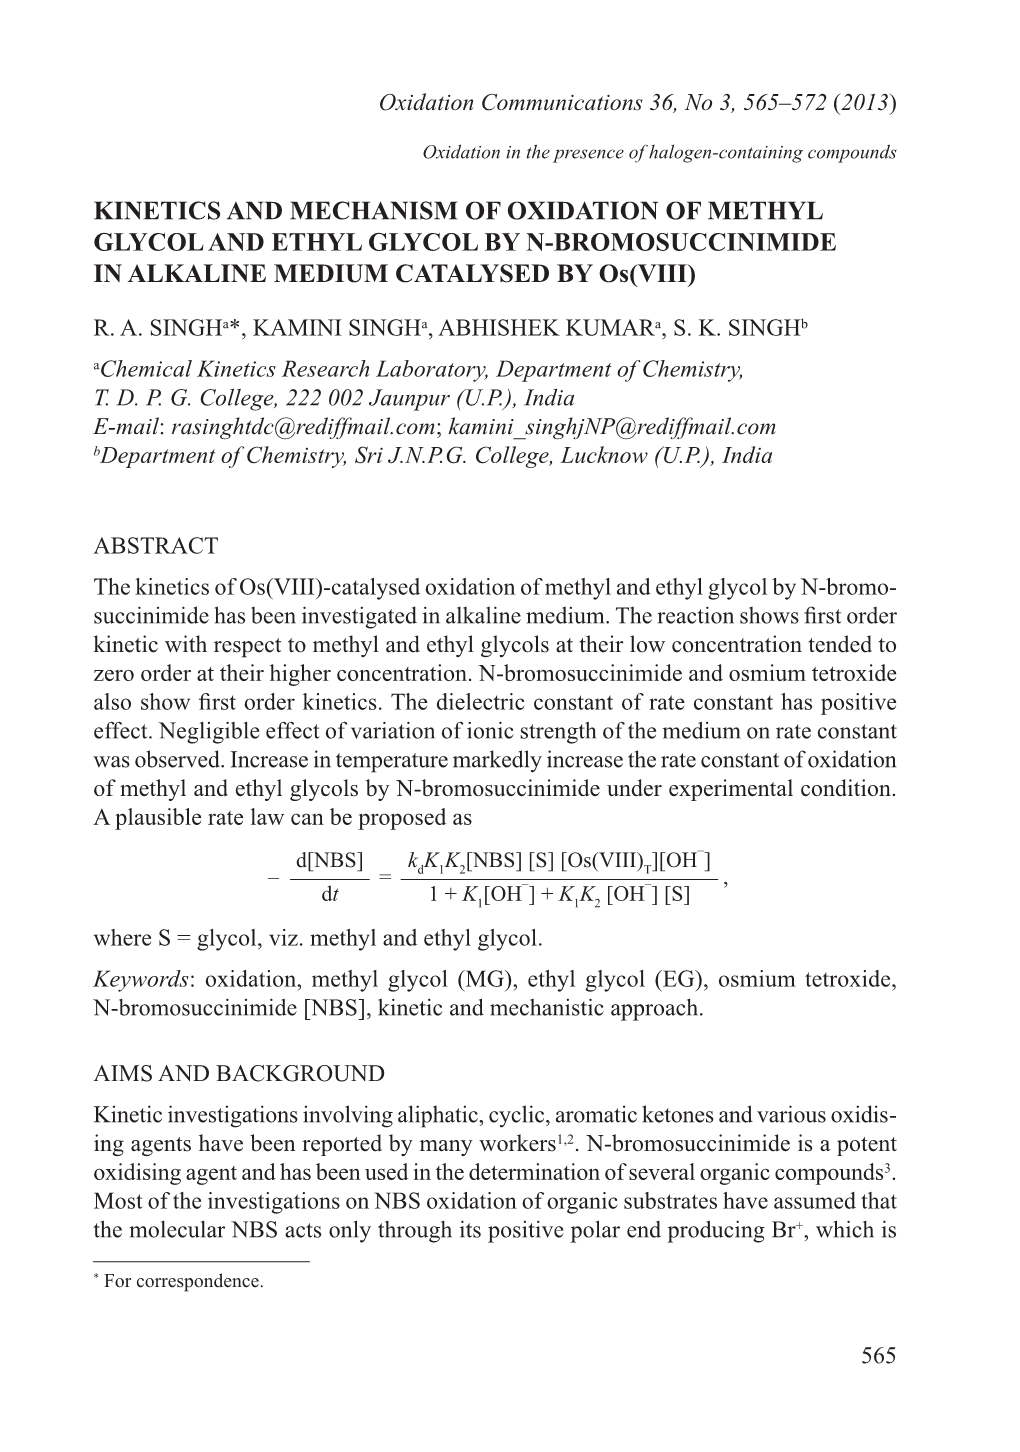 Kinetics and Mechanism of Oxidation of Methyl Glycol and Ethyl Glycol by N-Bromosuccinimide in Alkaline Medium Catalysed by Os(VIII)